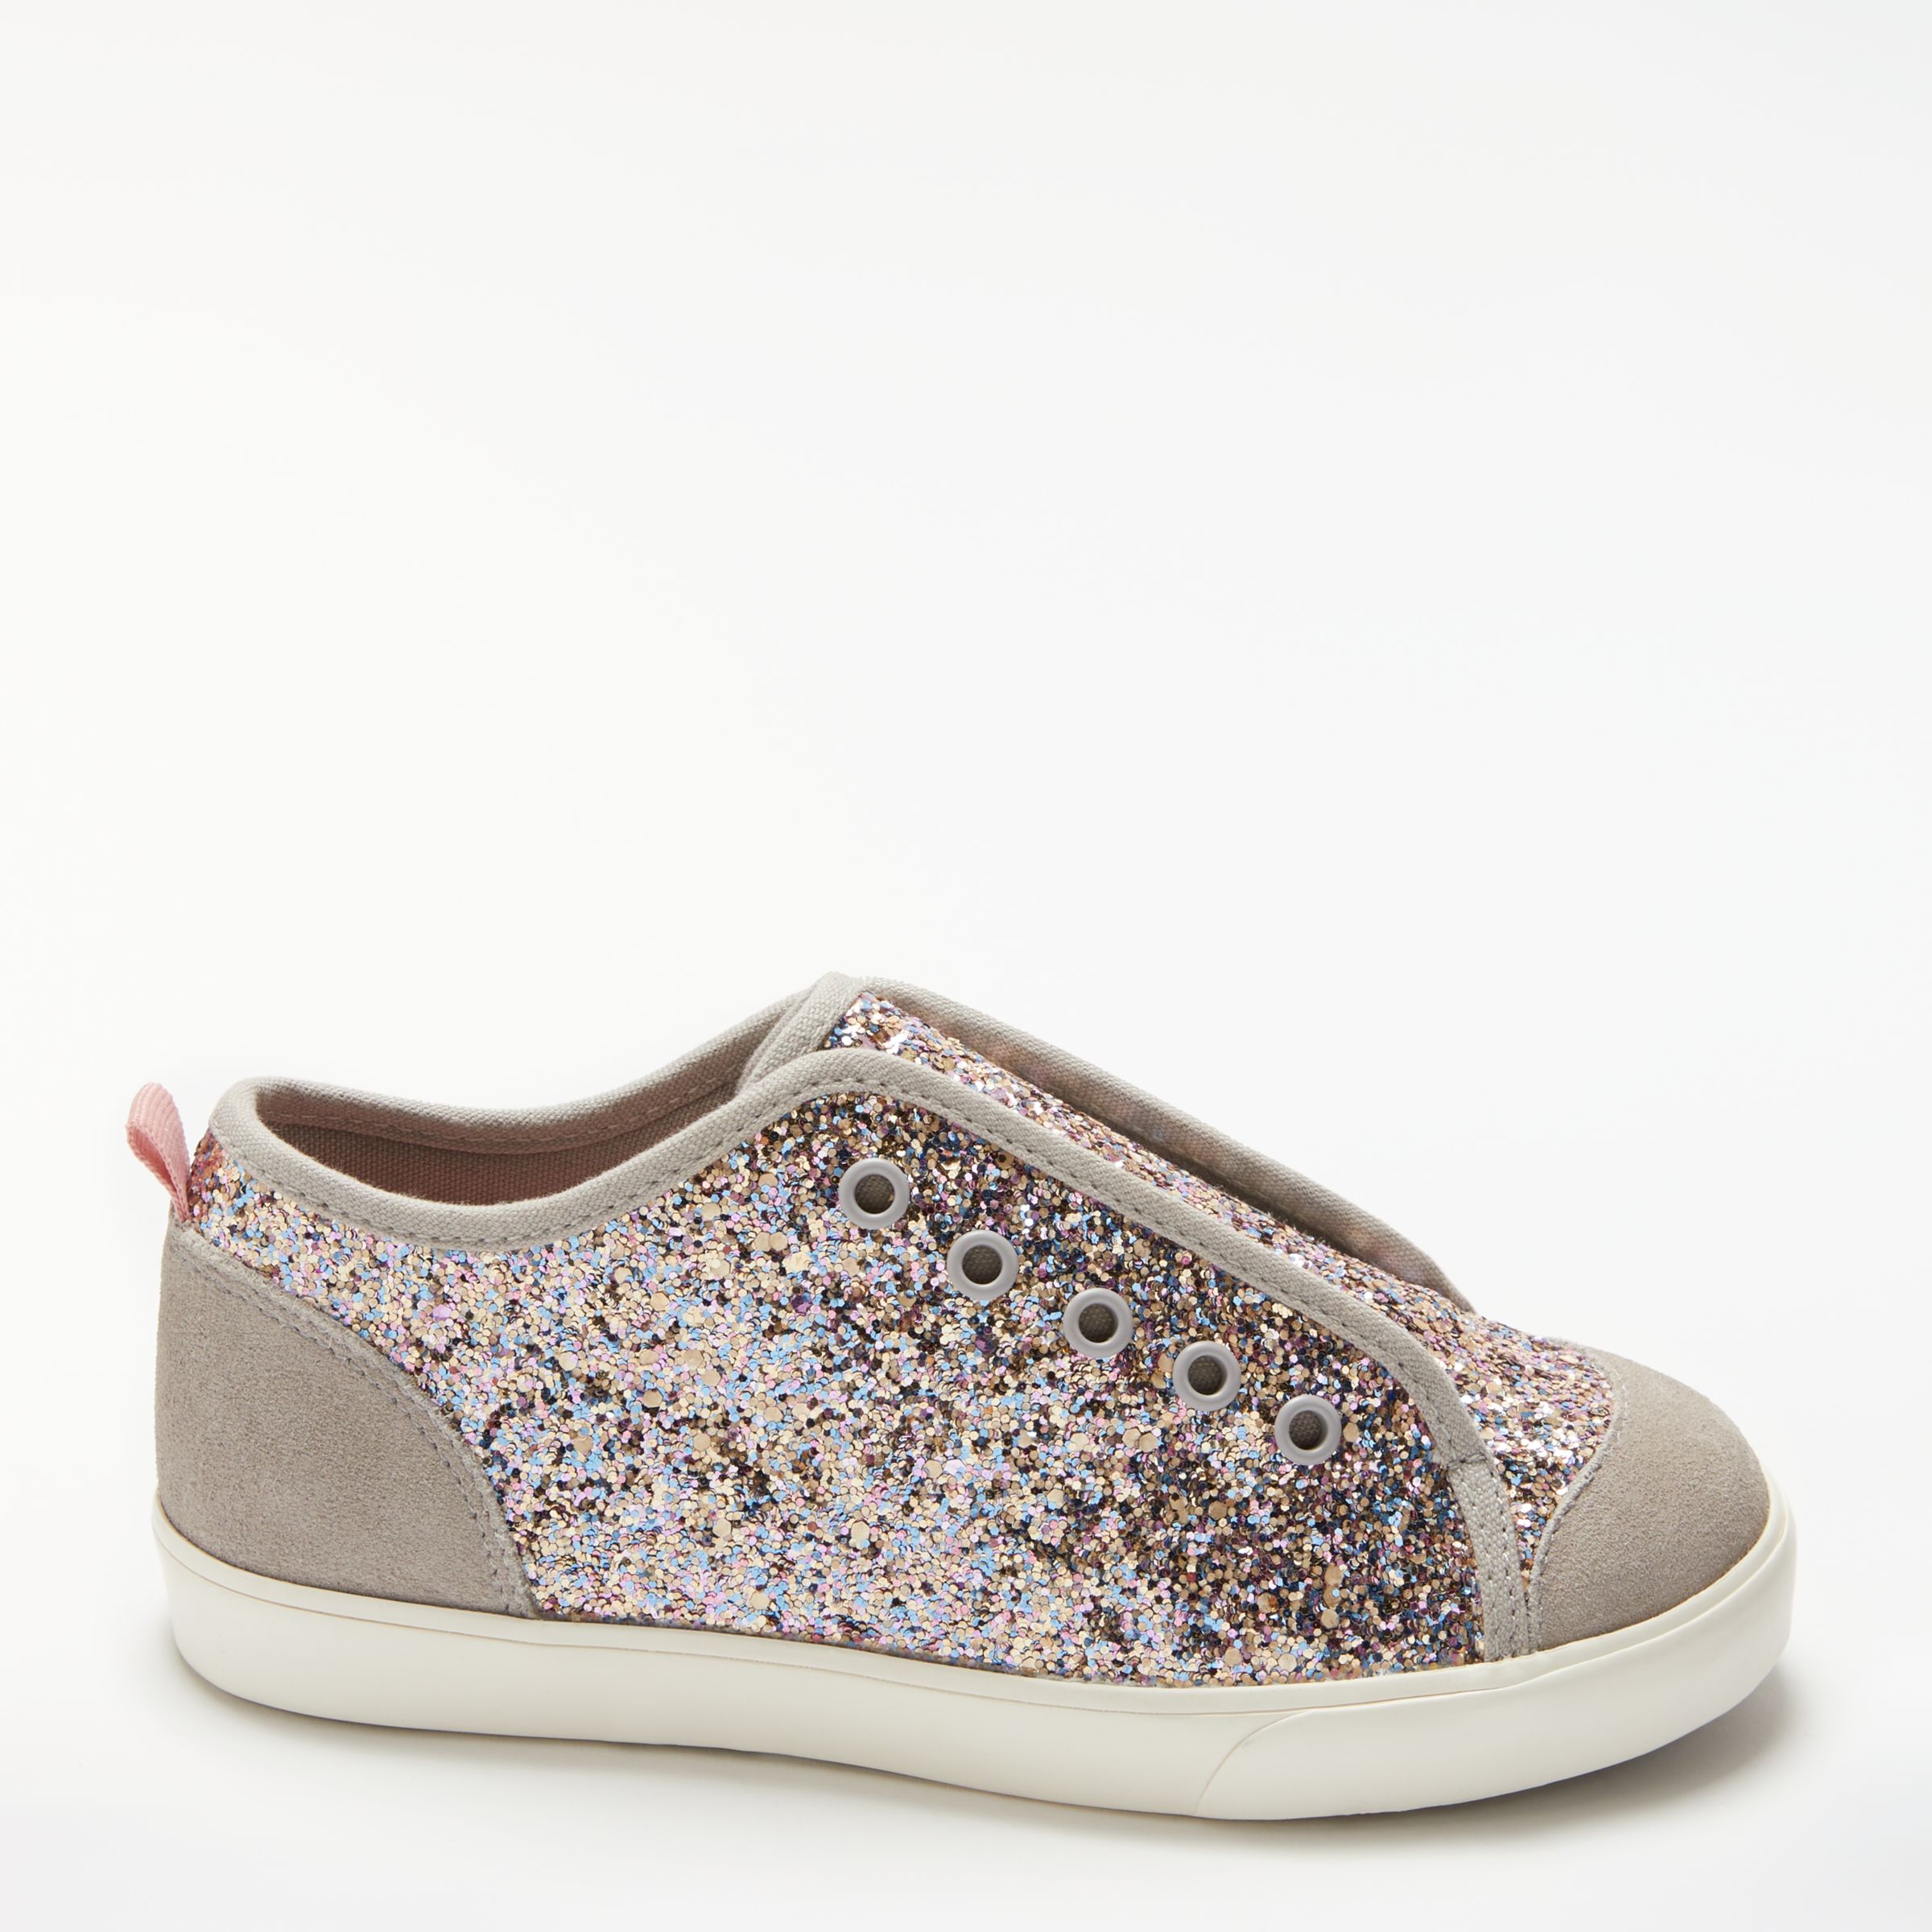 John Lewis & Partners Children's Coco Glitter Shoes, Pink